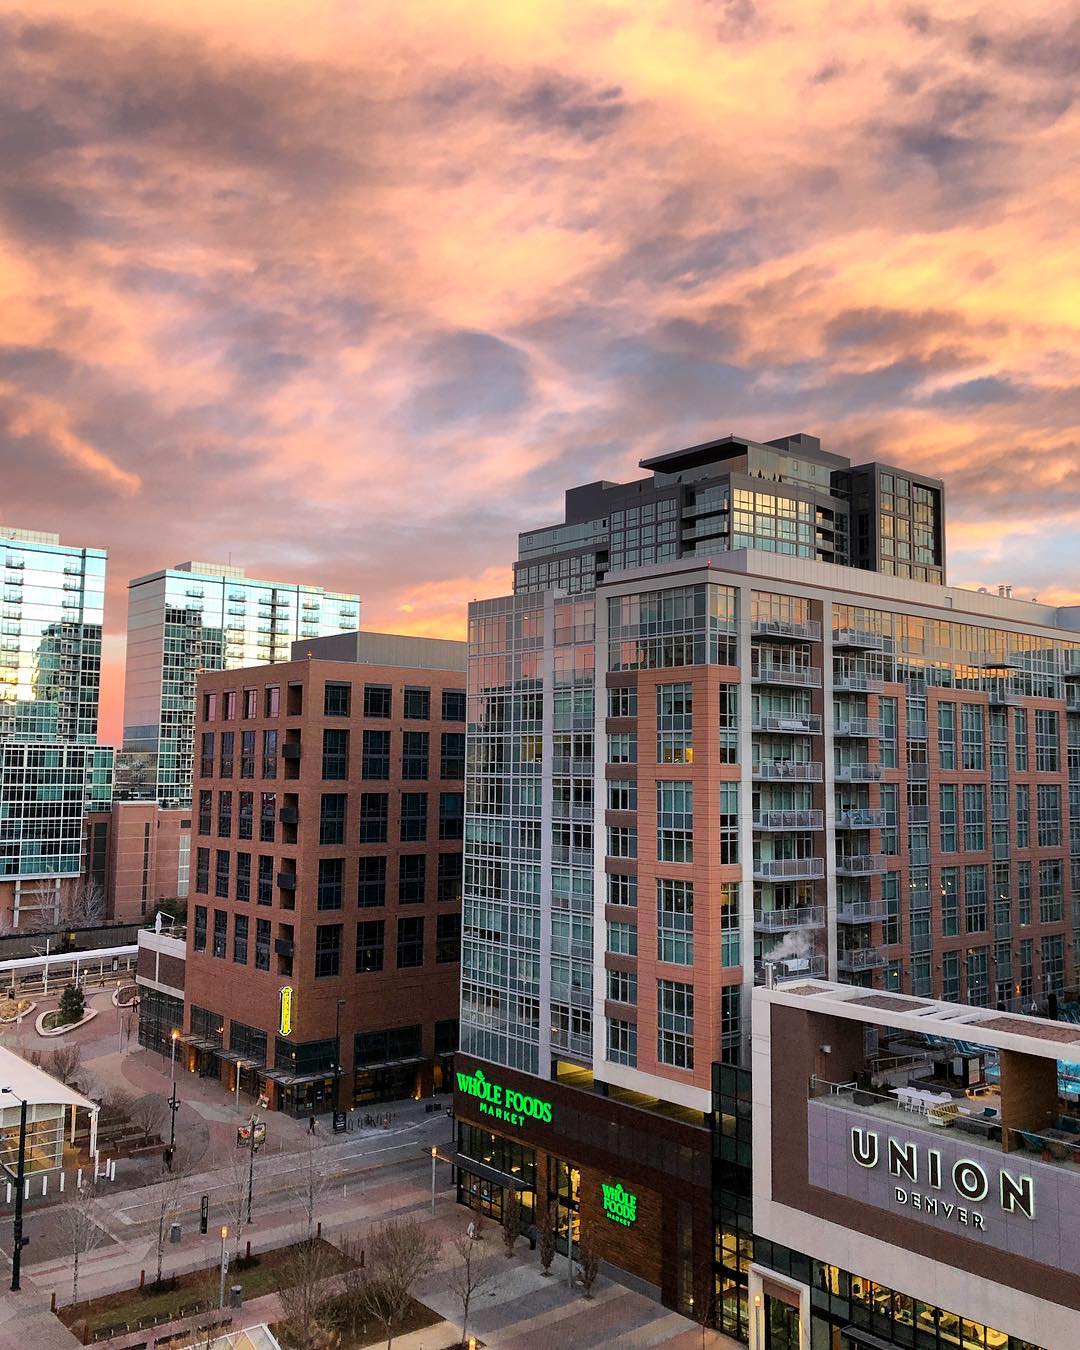 Nightime Photo of The Grand and Glass House Buildings in LoDo, Denver. Photo by Instagram user @randymajors